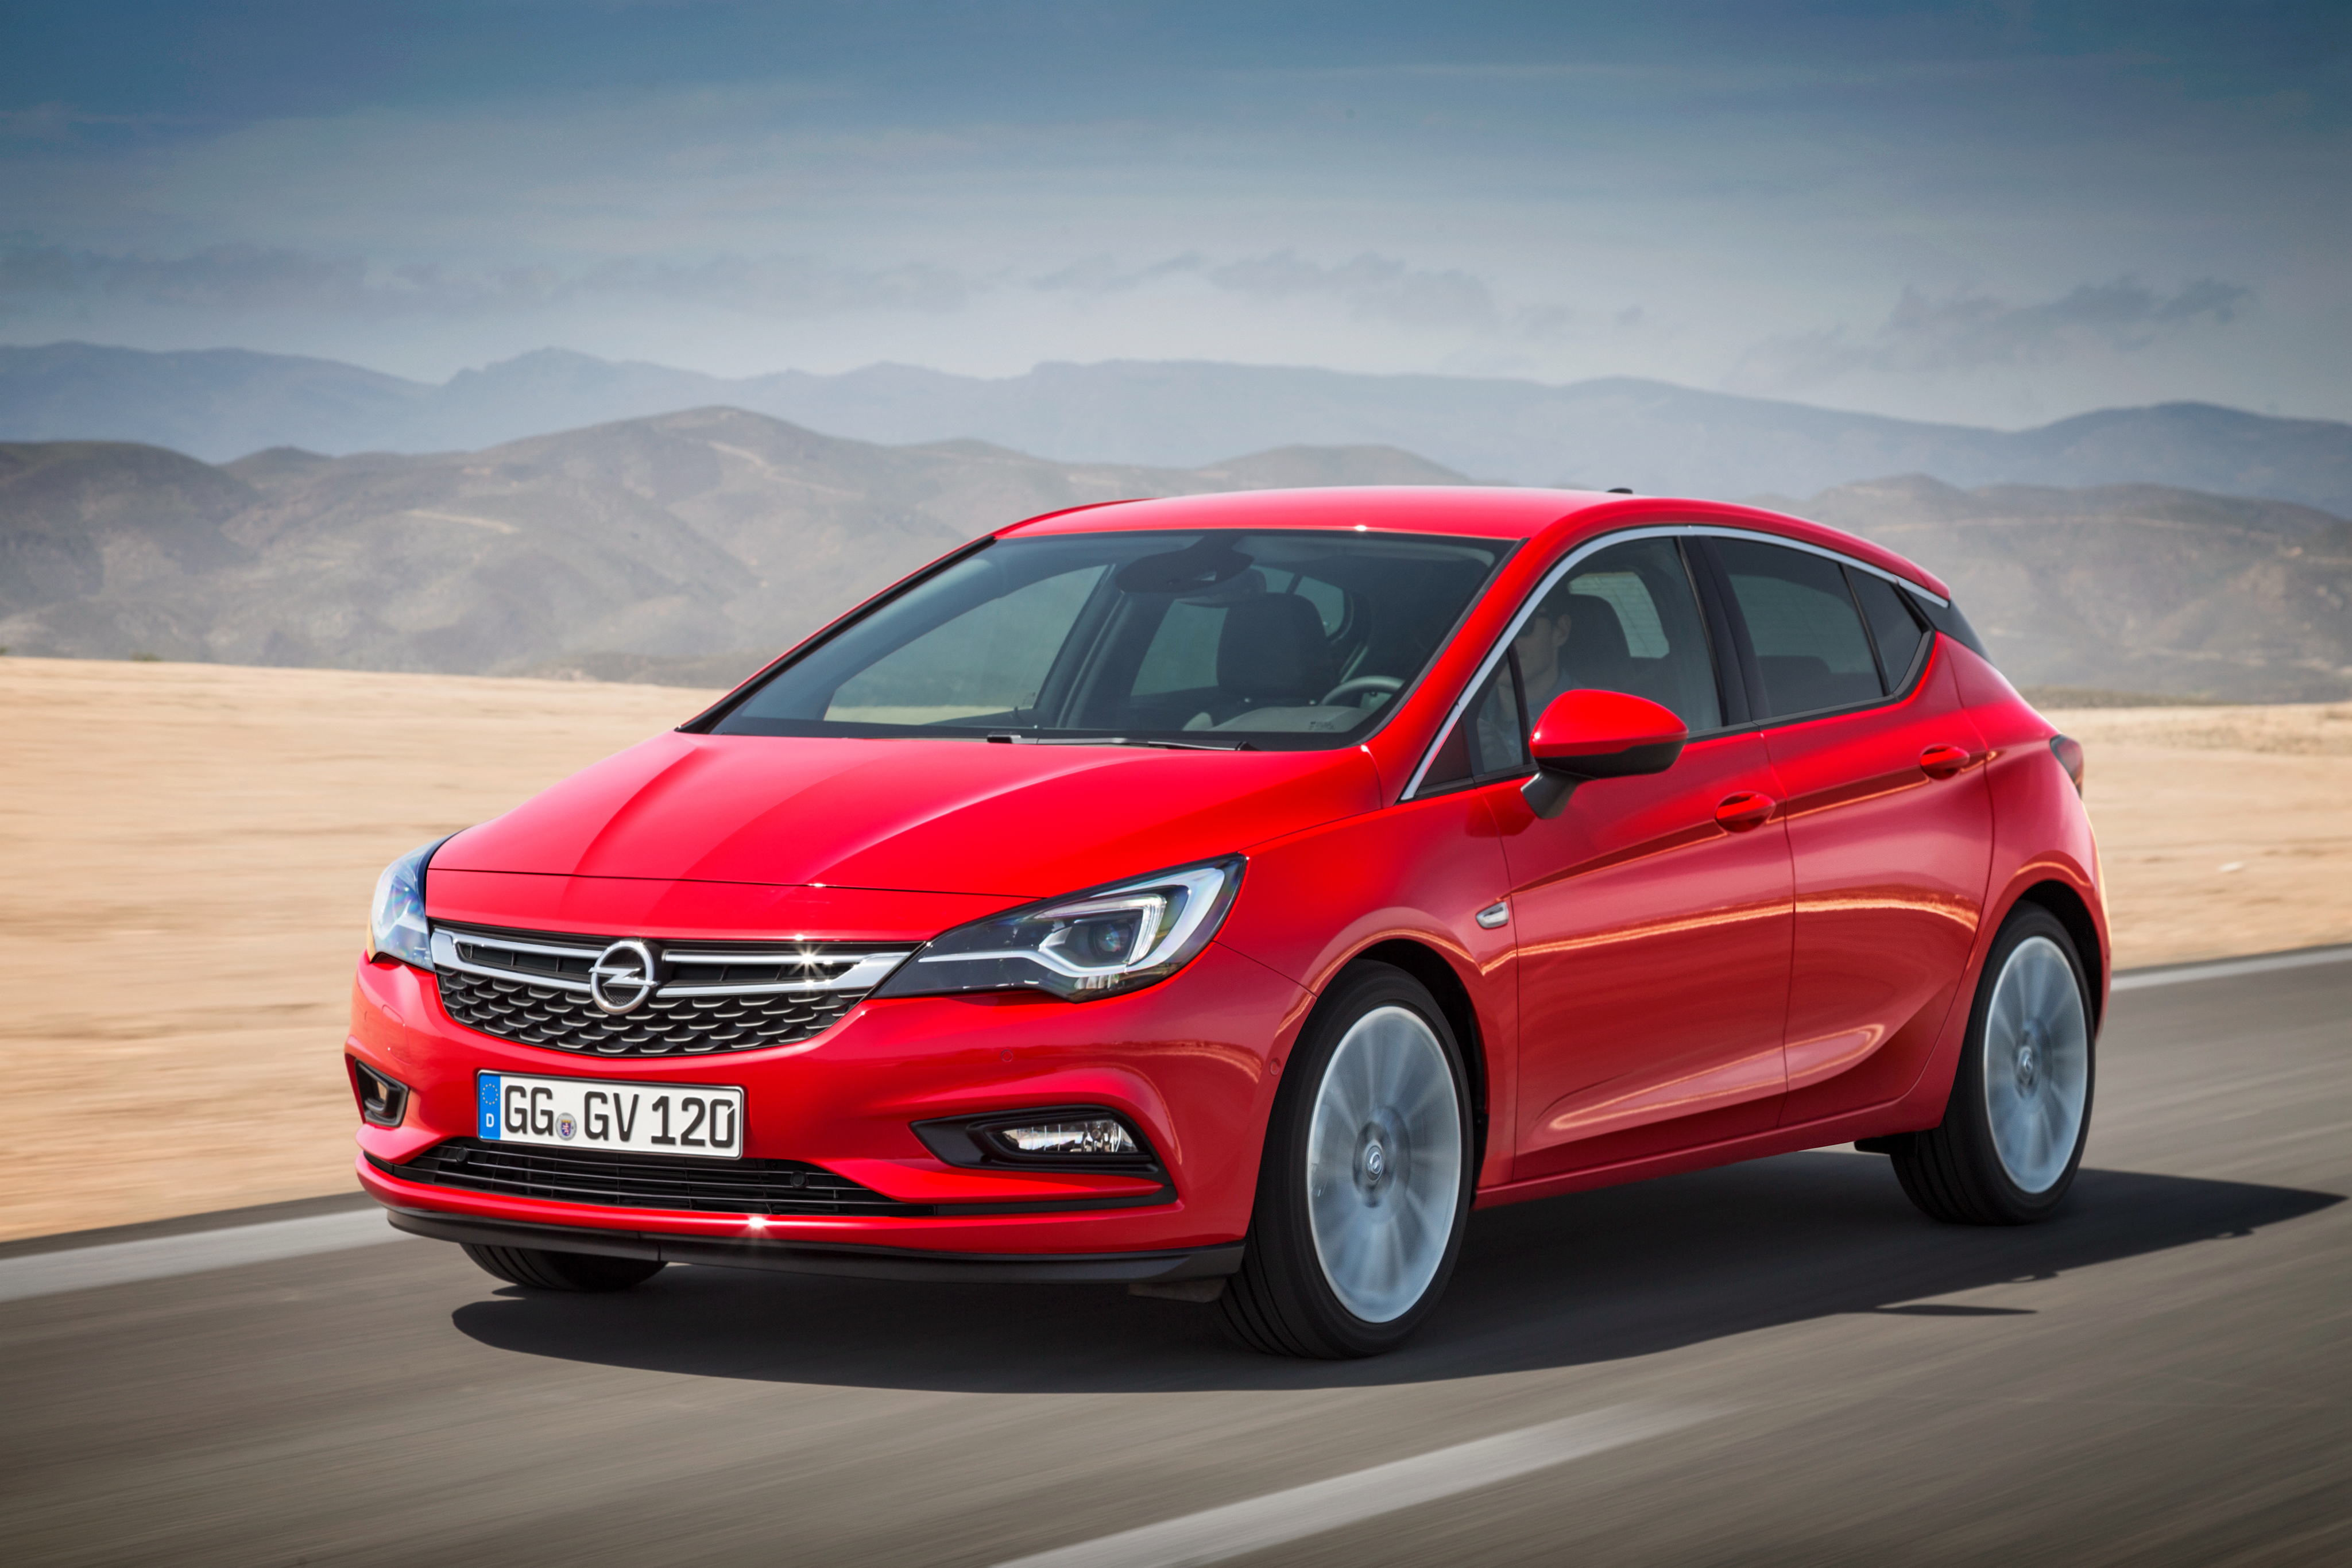 Car Compact Car Opel Opel Astra Red Car Vehicle 4096x2731